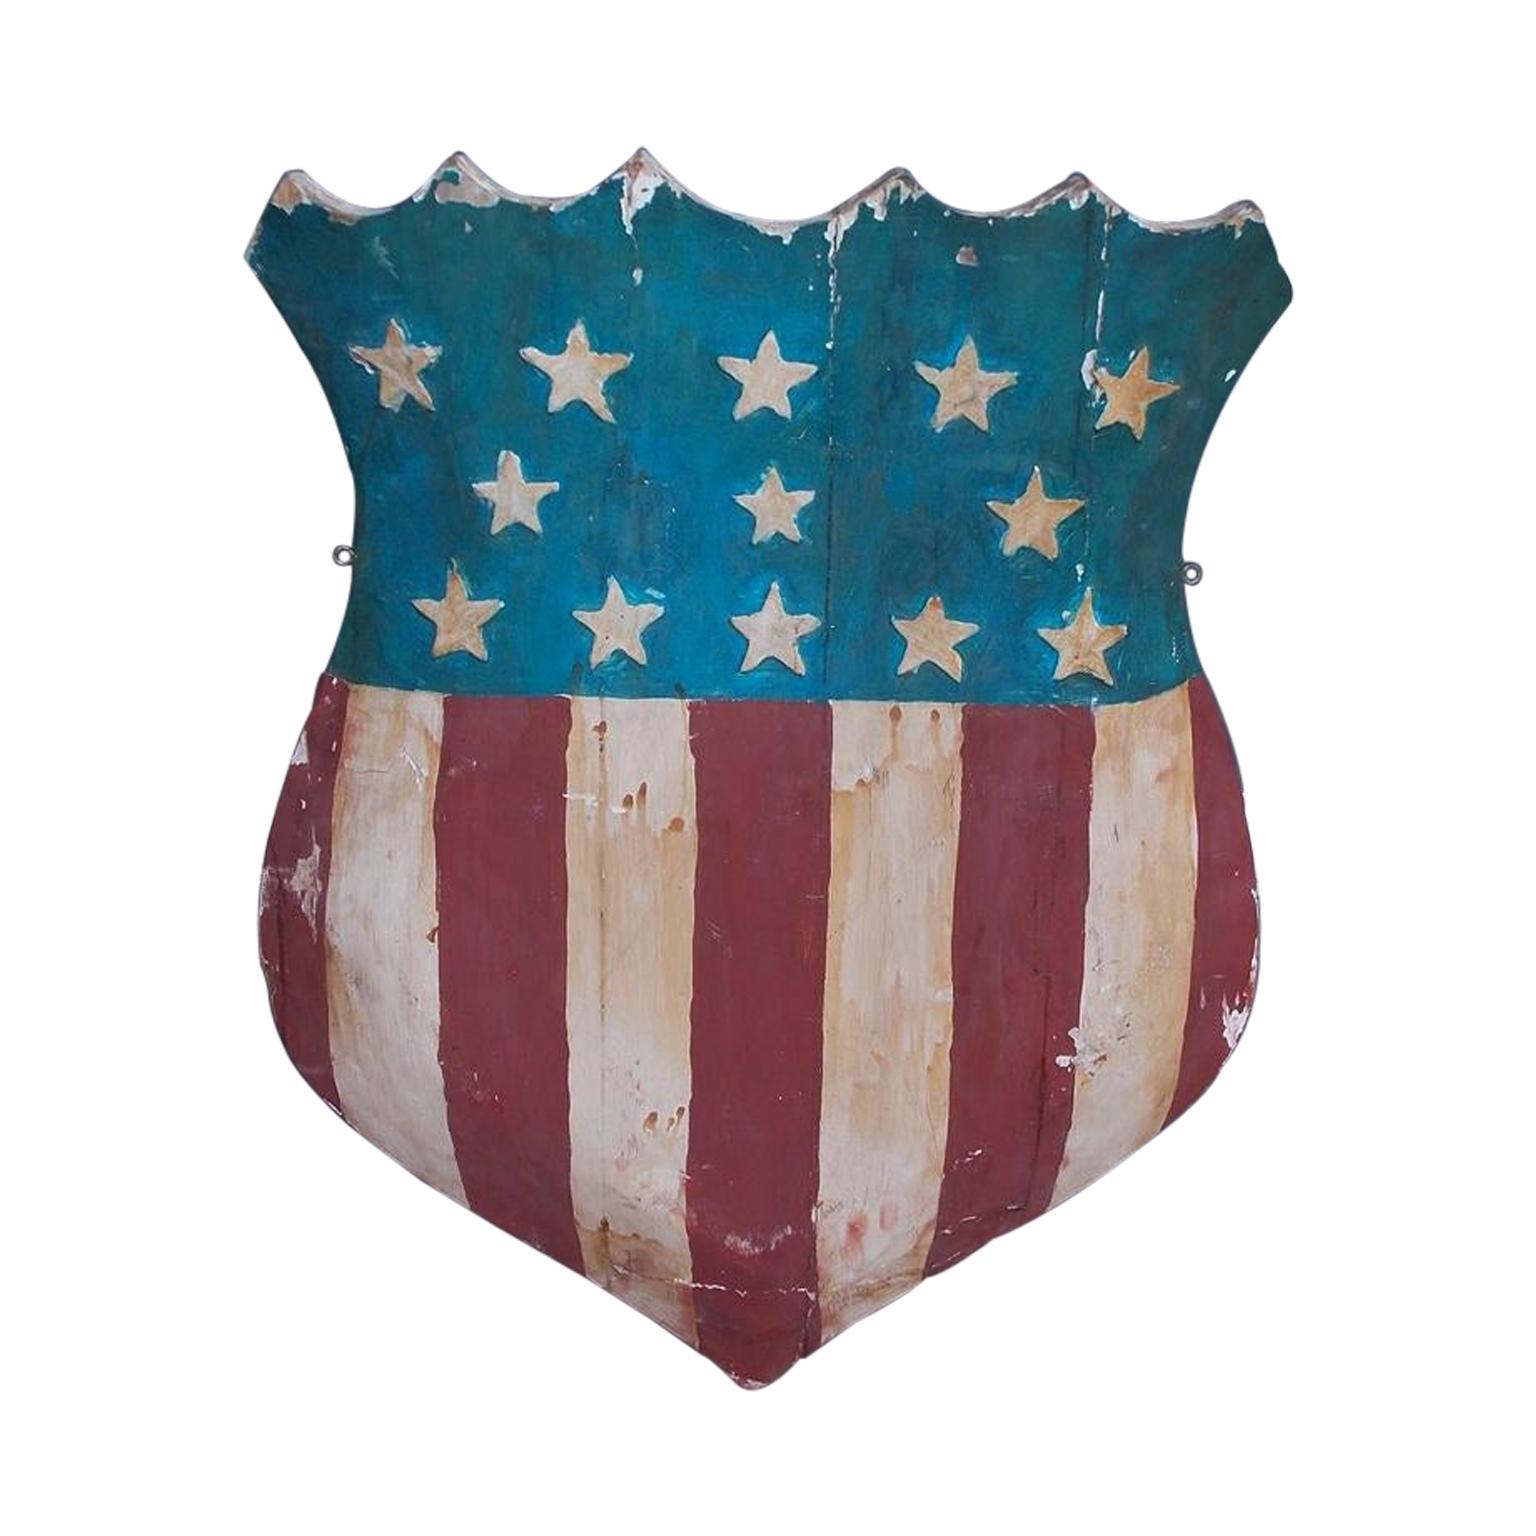 American Hand Carved and Painted Patriotic Shield with Raised Stars. C. 1870